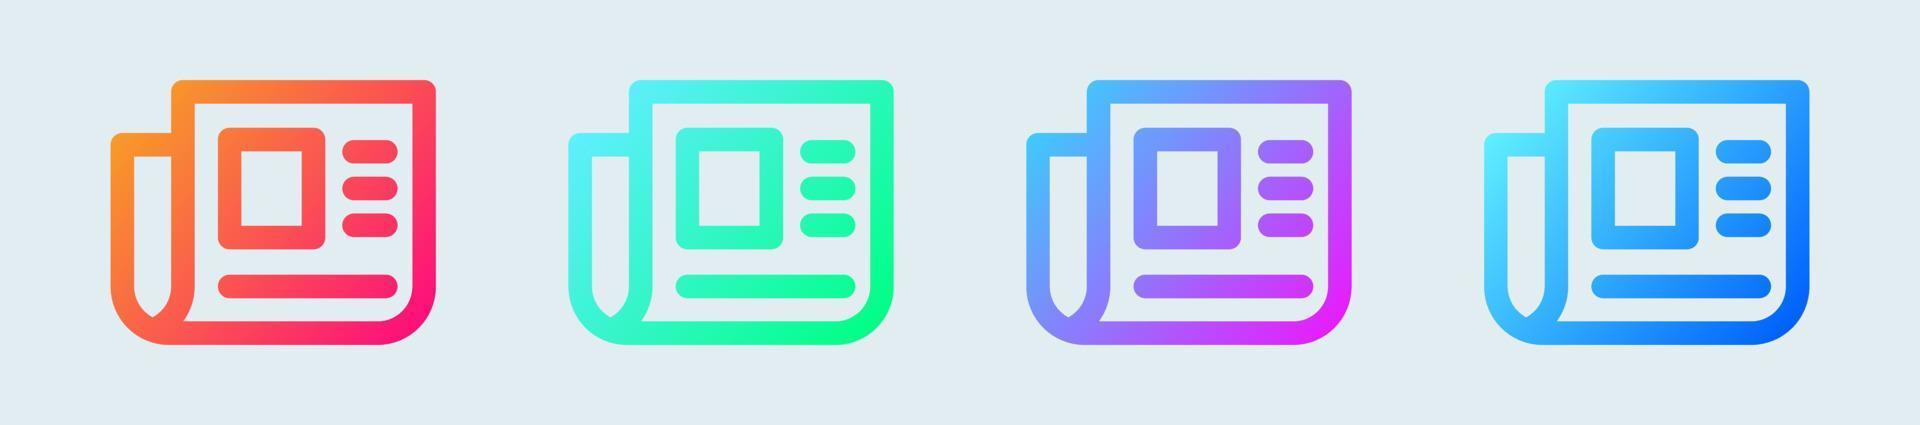 Newspaper line icon in gradient colors. News paper signs vector illustration.